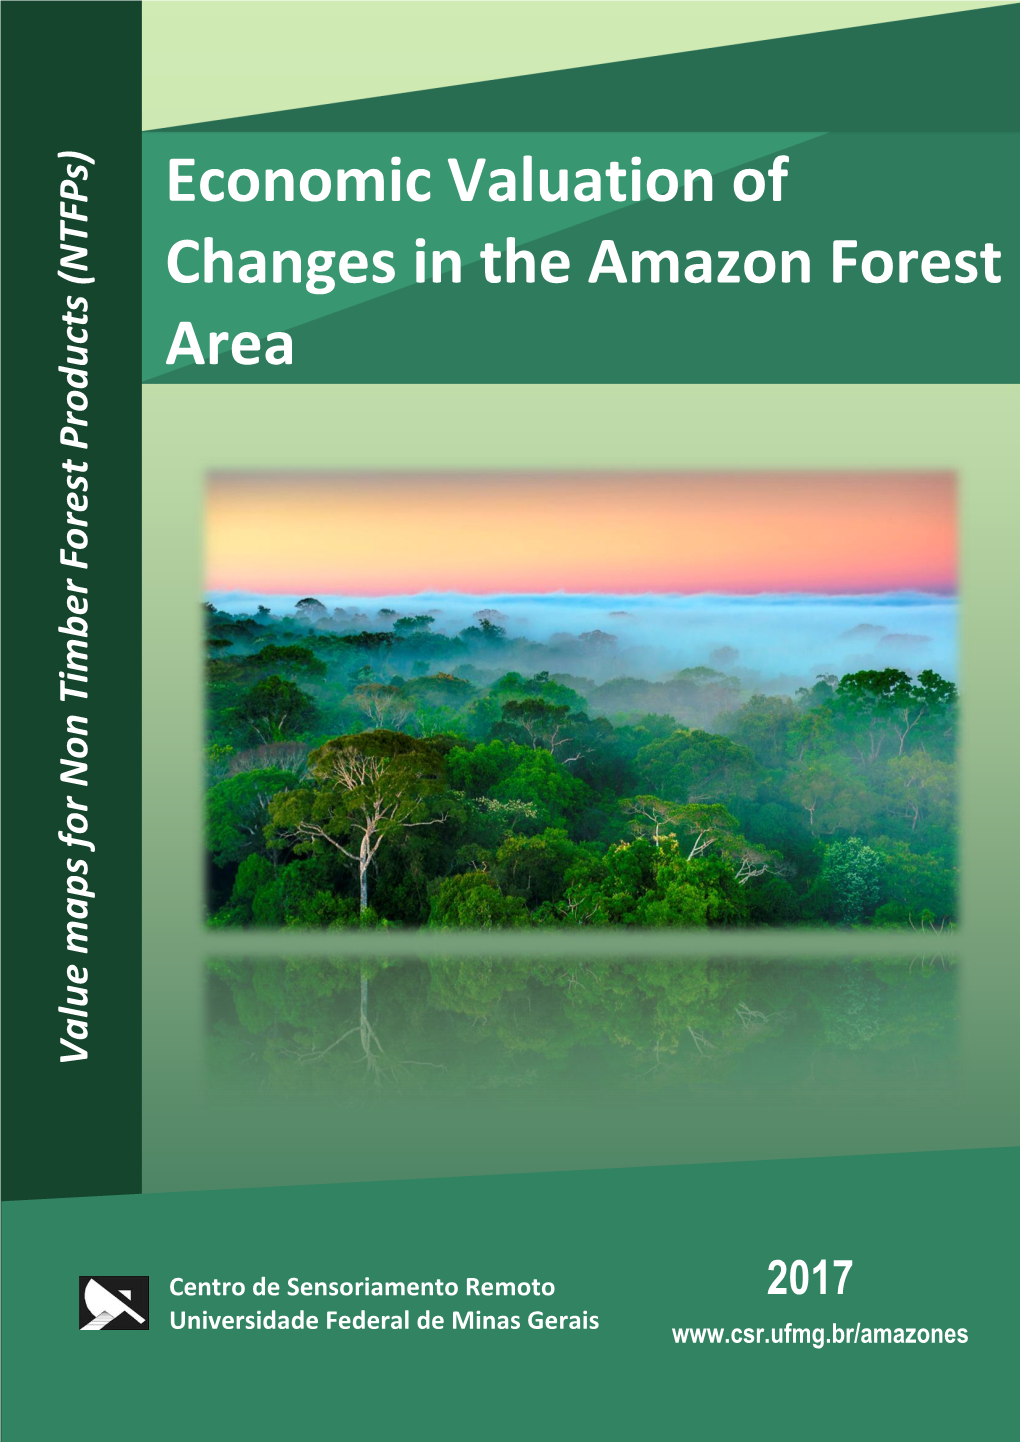 Economic Valuation of Changes in the Amazon Forest Area